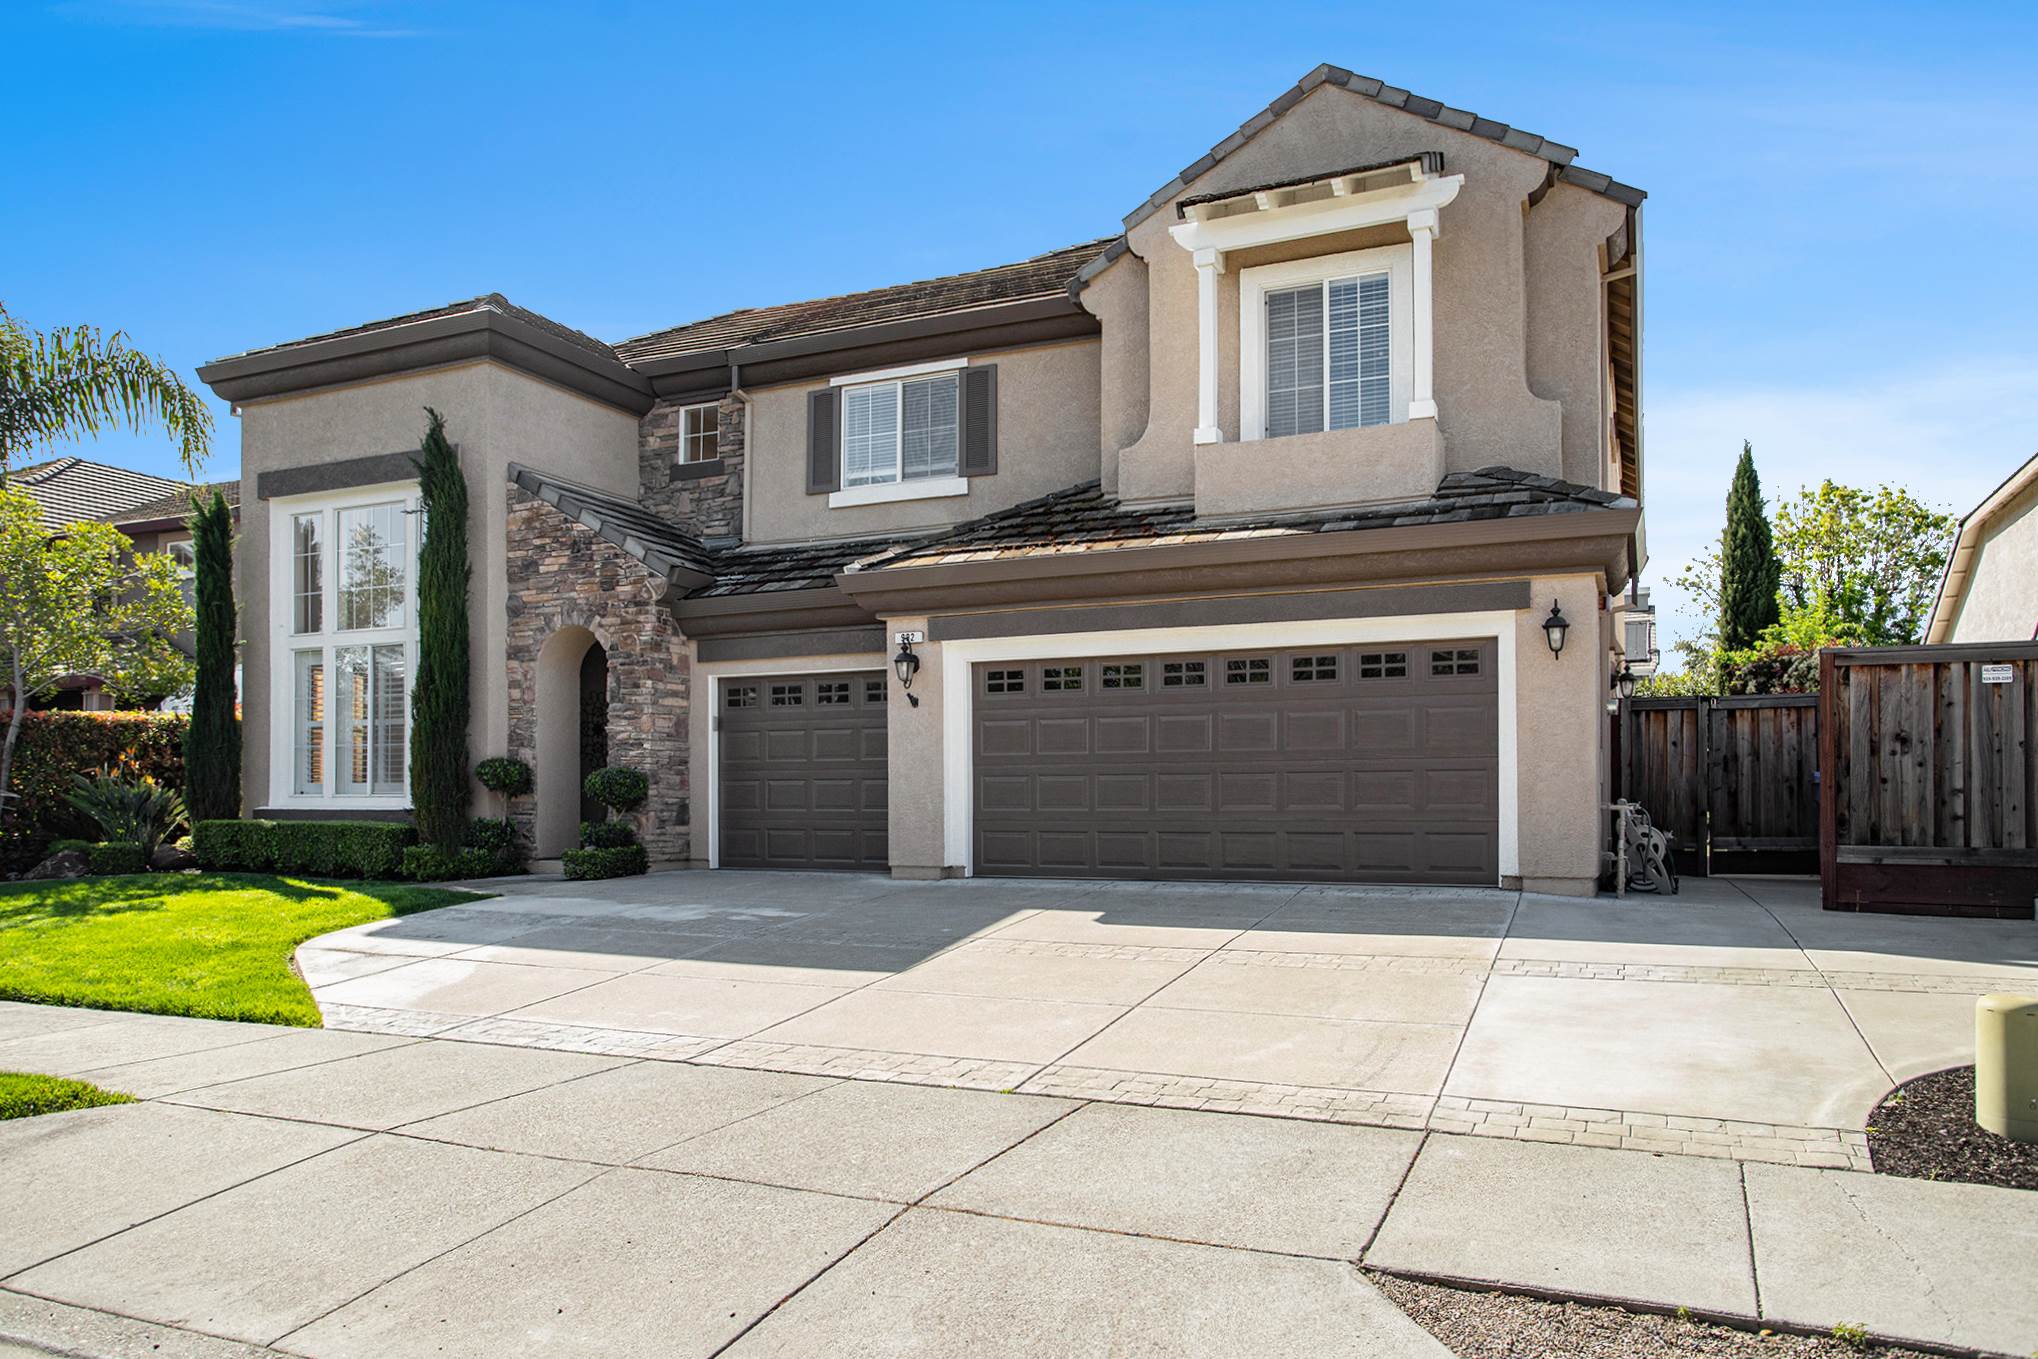 992 Country Glen Ln, Brentwood, CA 94513